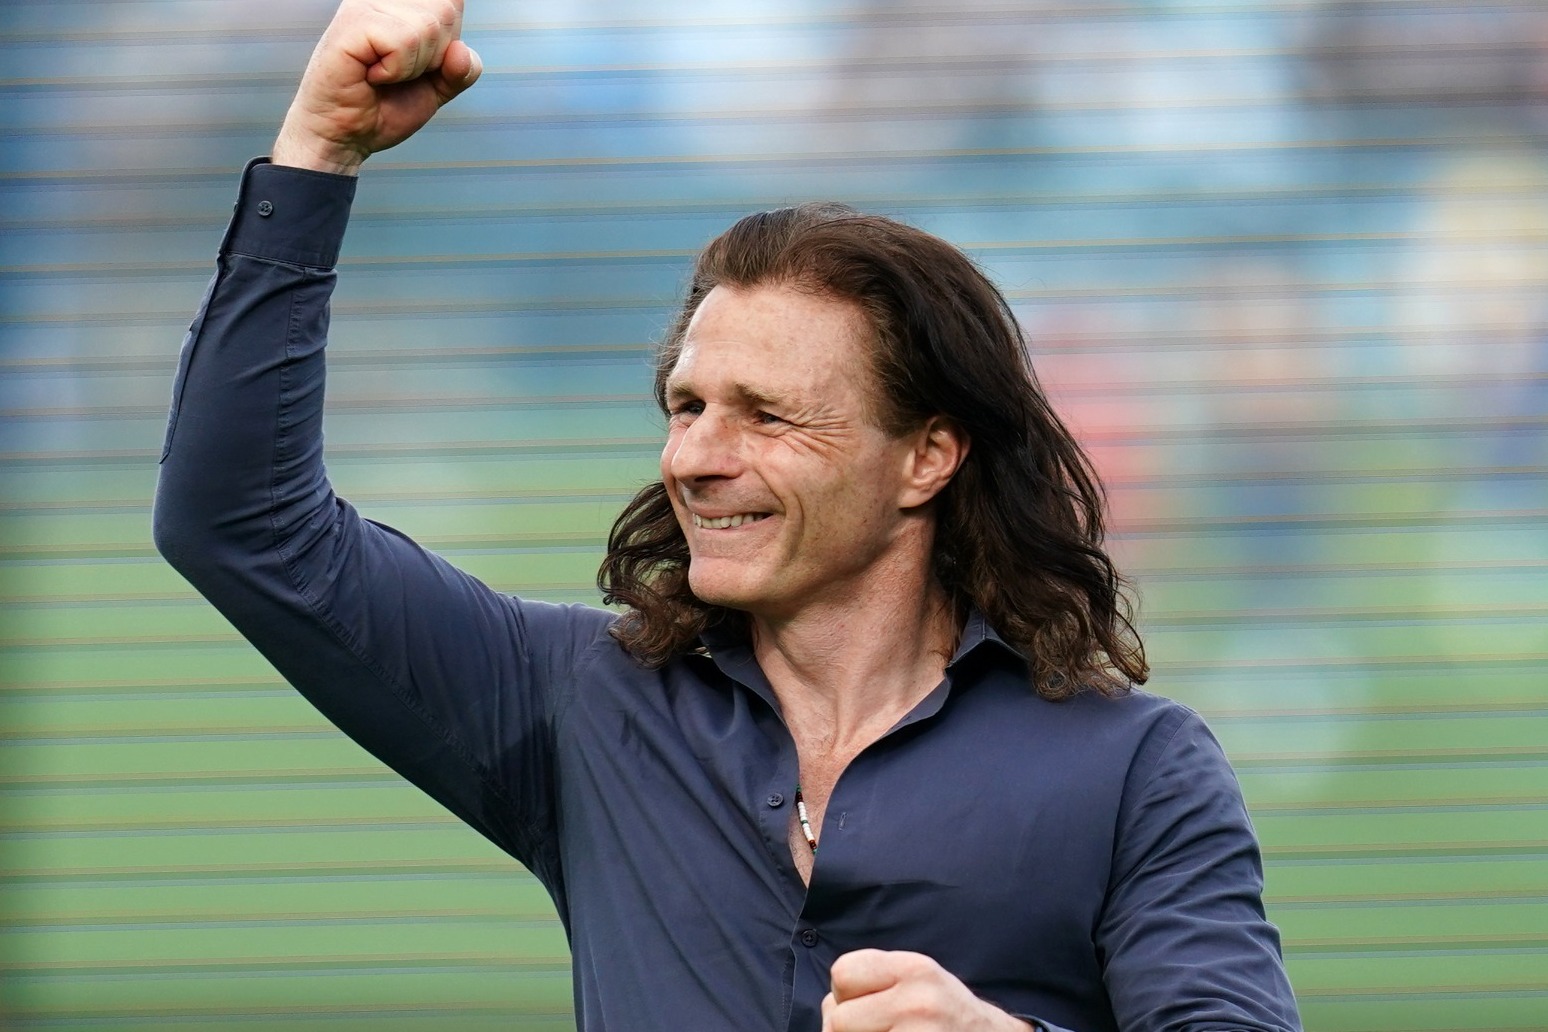 Wycombe ‘absolutely buzzing’ ahead of play-offs, says boss Gareth Ainsworth 